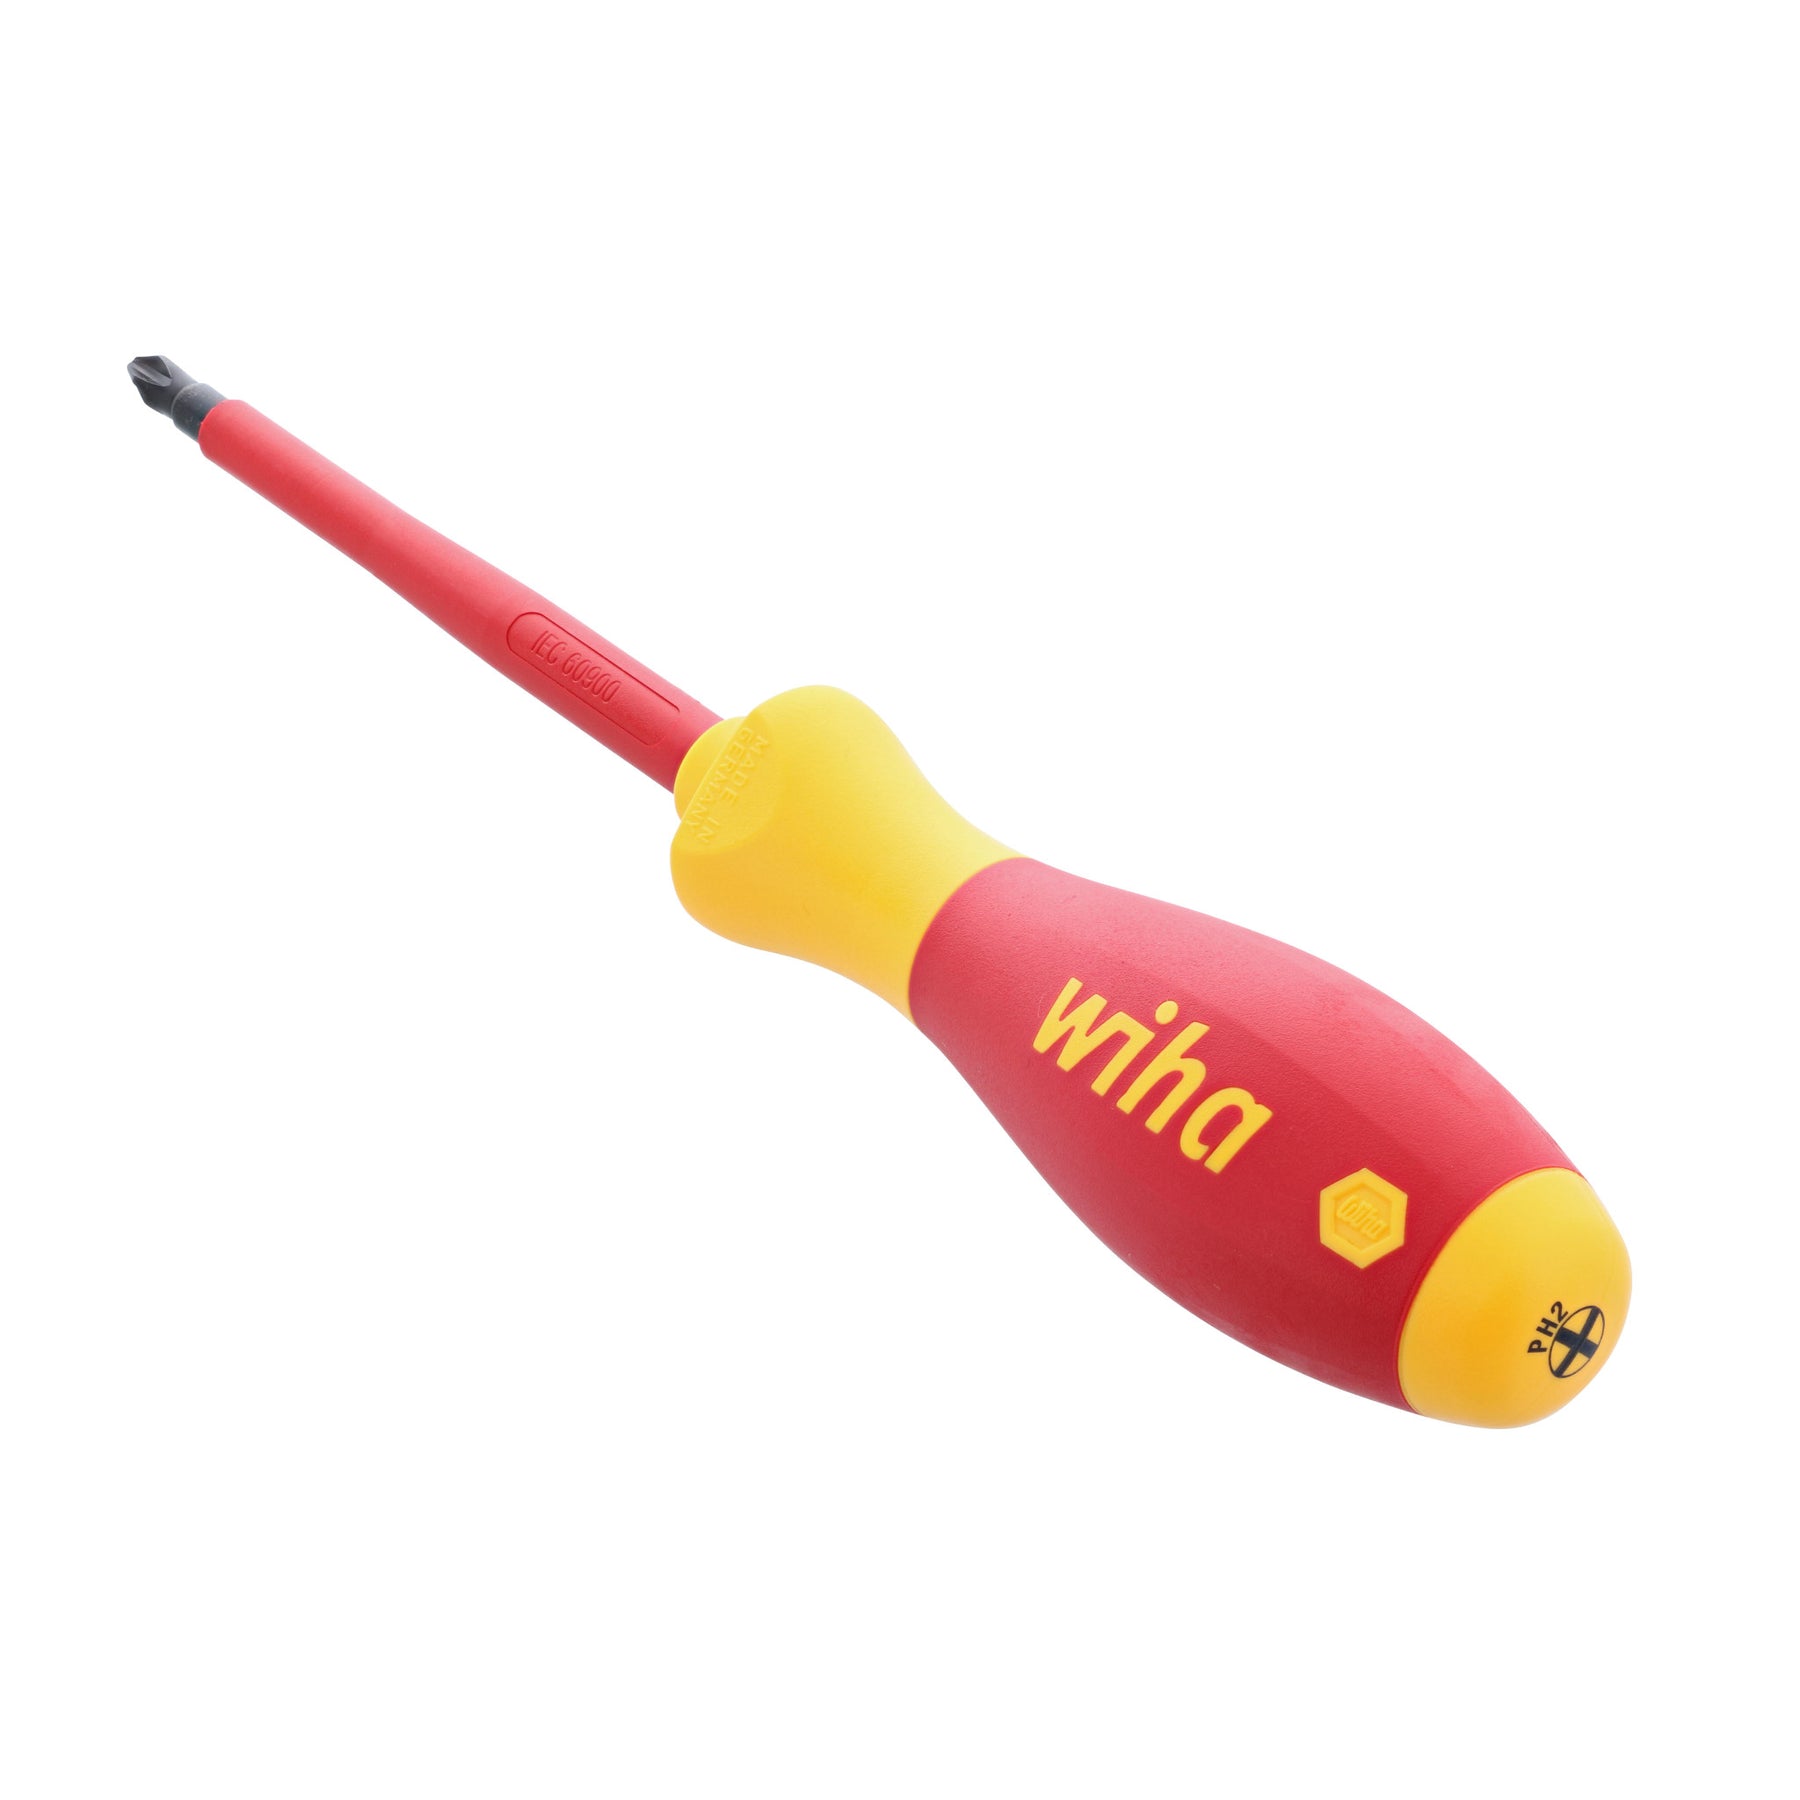 Insulated SoftFinish Phillips Screwdriver #2 x 100mm